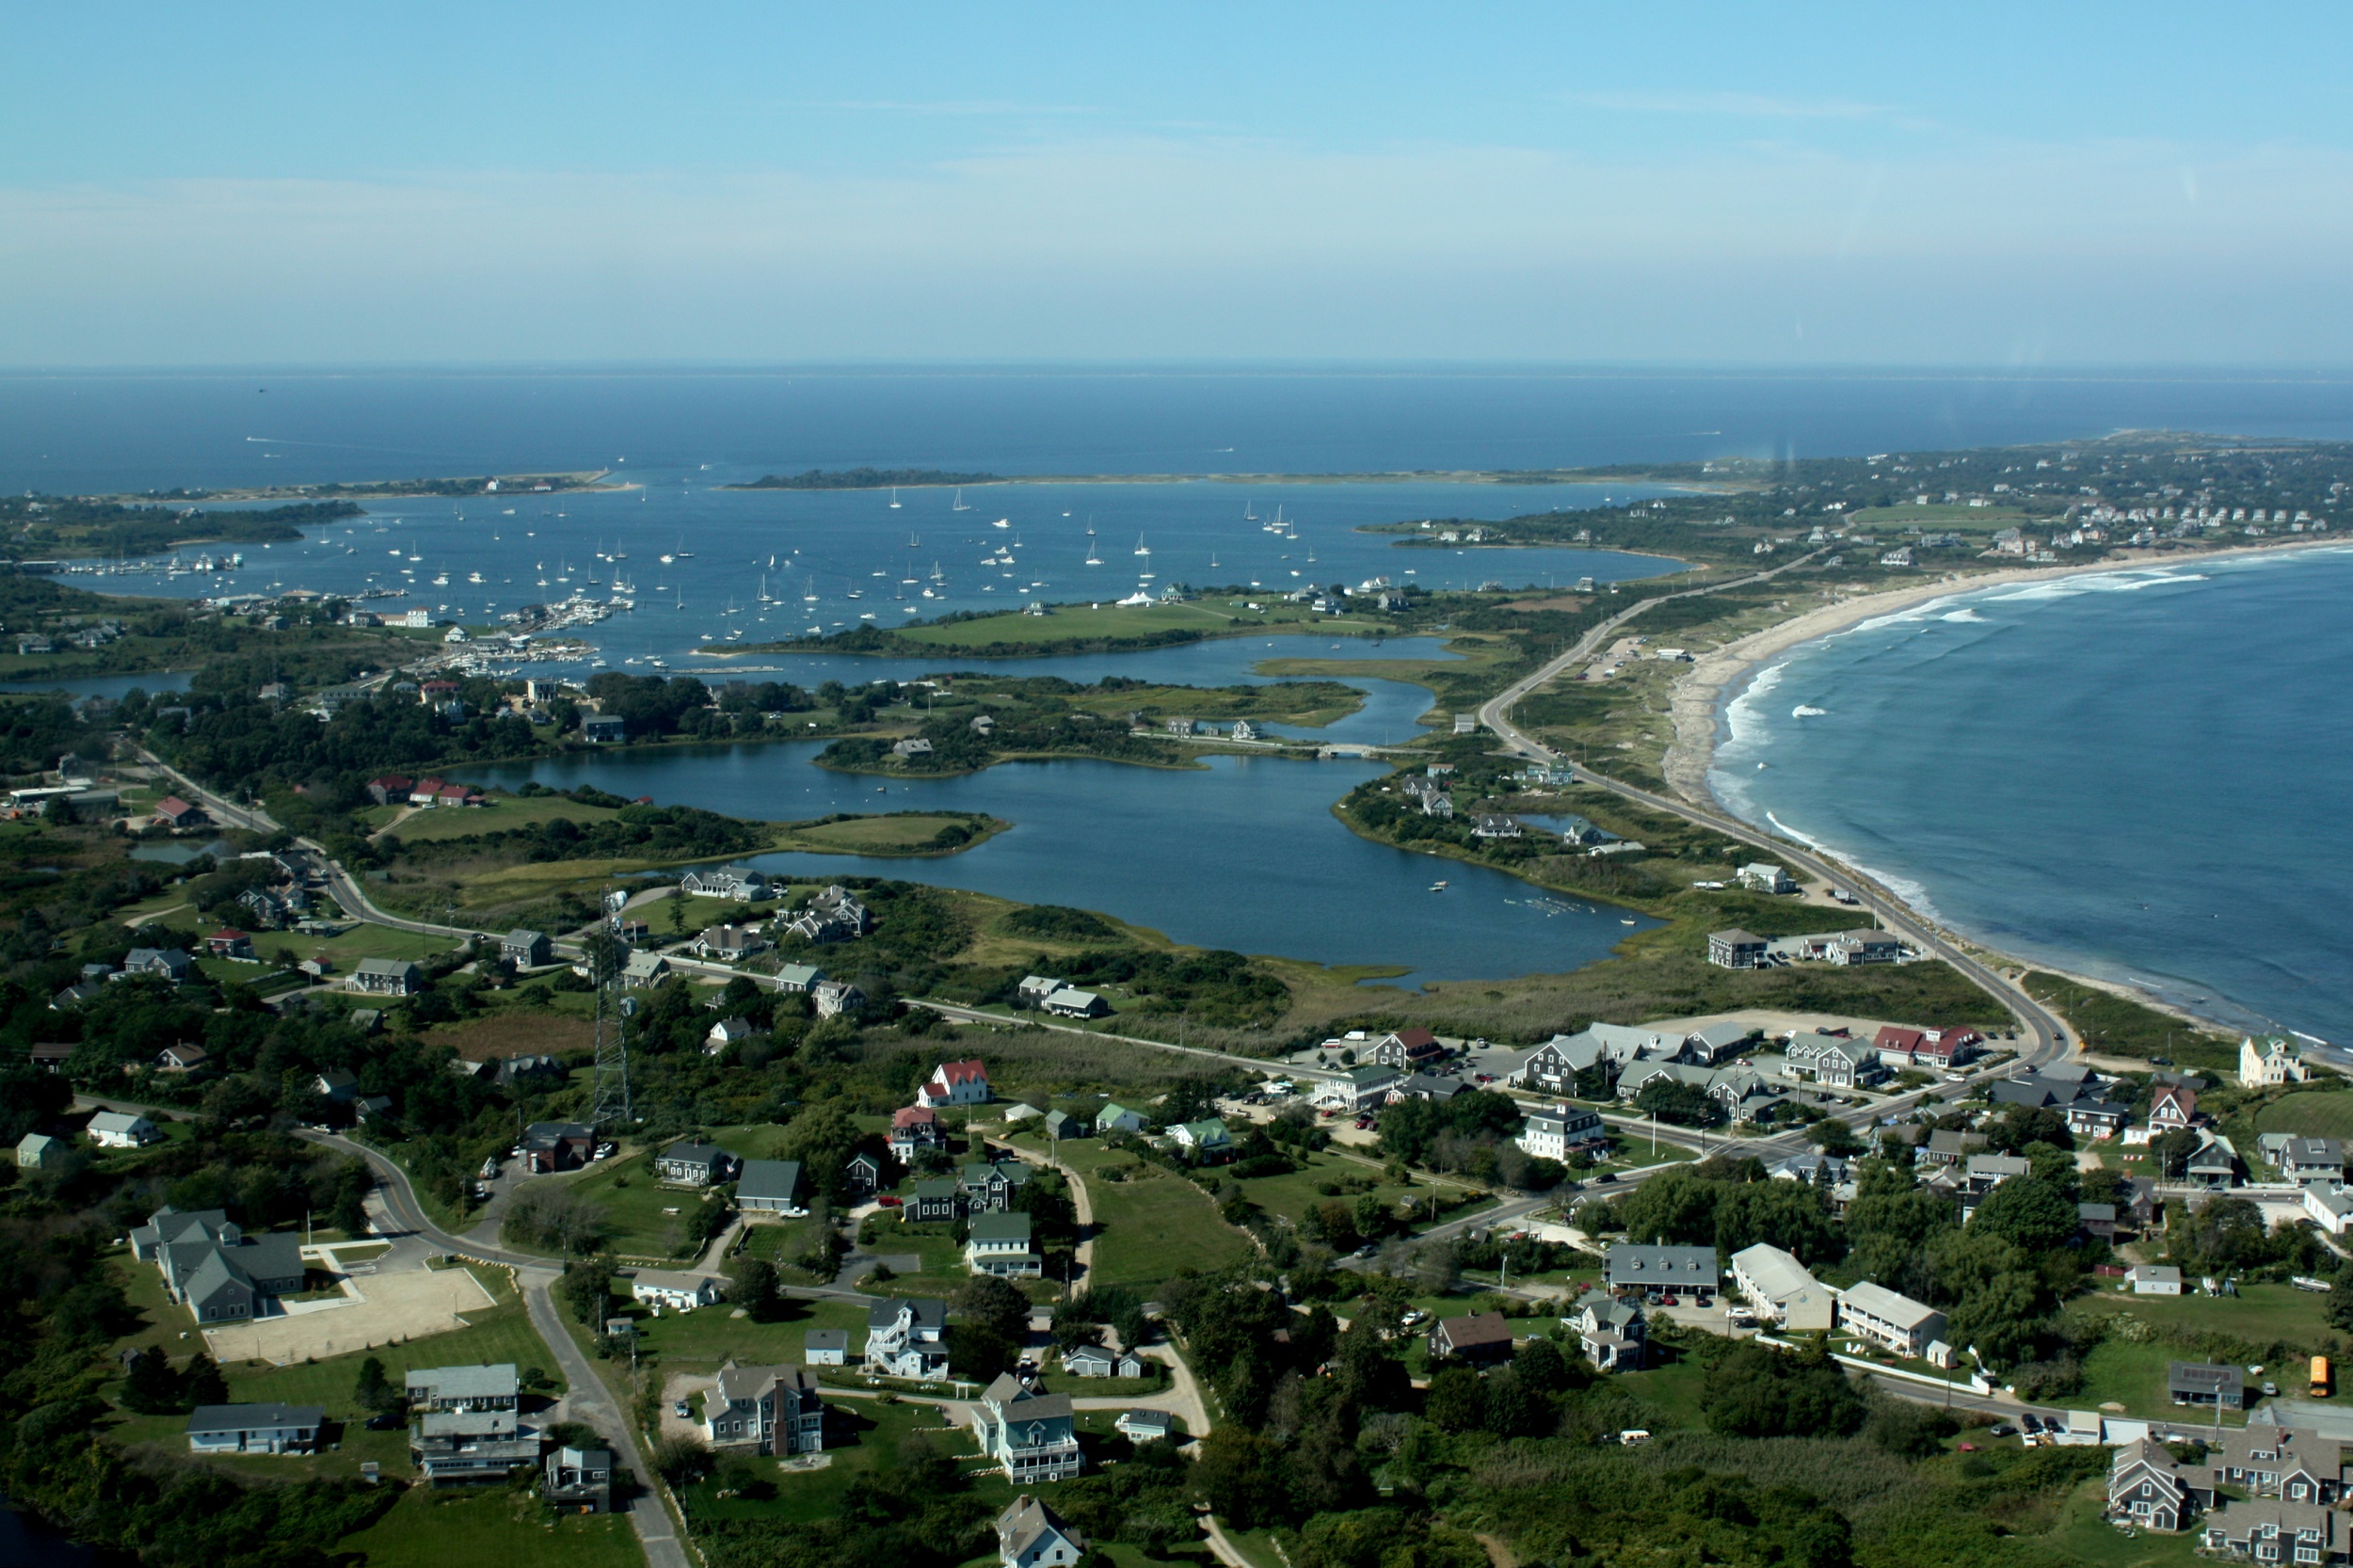 Block Island and the Rhode Island coast are dotted with homes, many of which use septic systems to dispose of toilet waste. Rising sea levels will render these systems less effective at removing bacteria and nutrients. Photo courtesy of Flickr/Creative Commons user eatswords